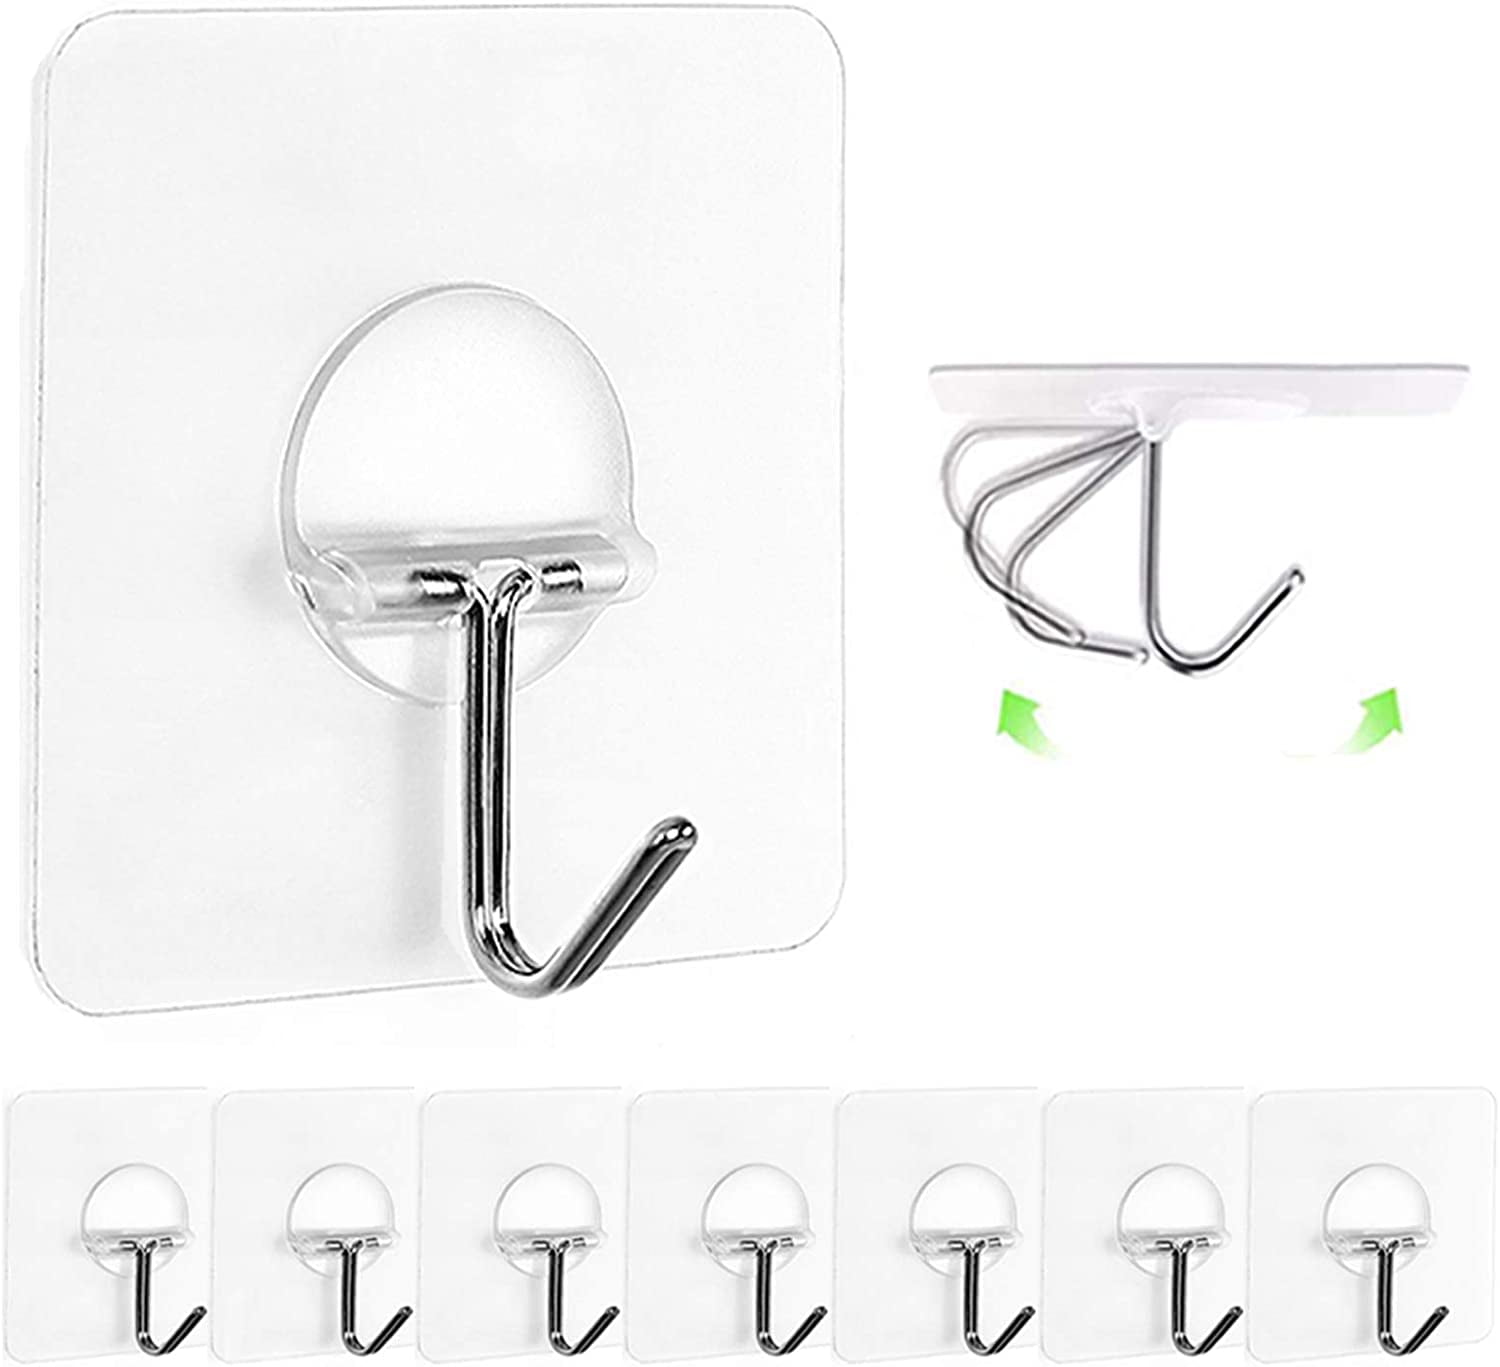 20X Adhesive Strong Hook Wall Sticky Hanger Kitchen Bathroom Transparent Holder 